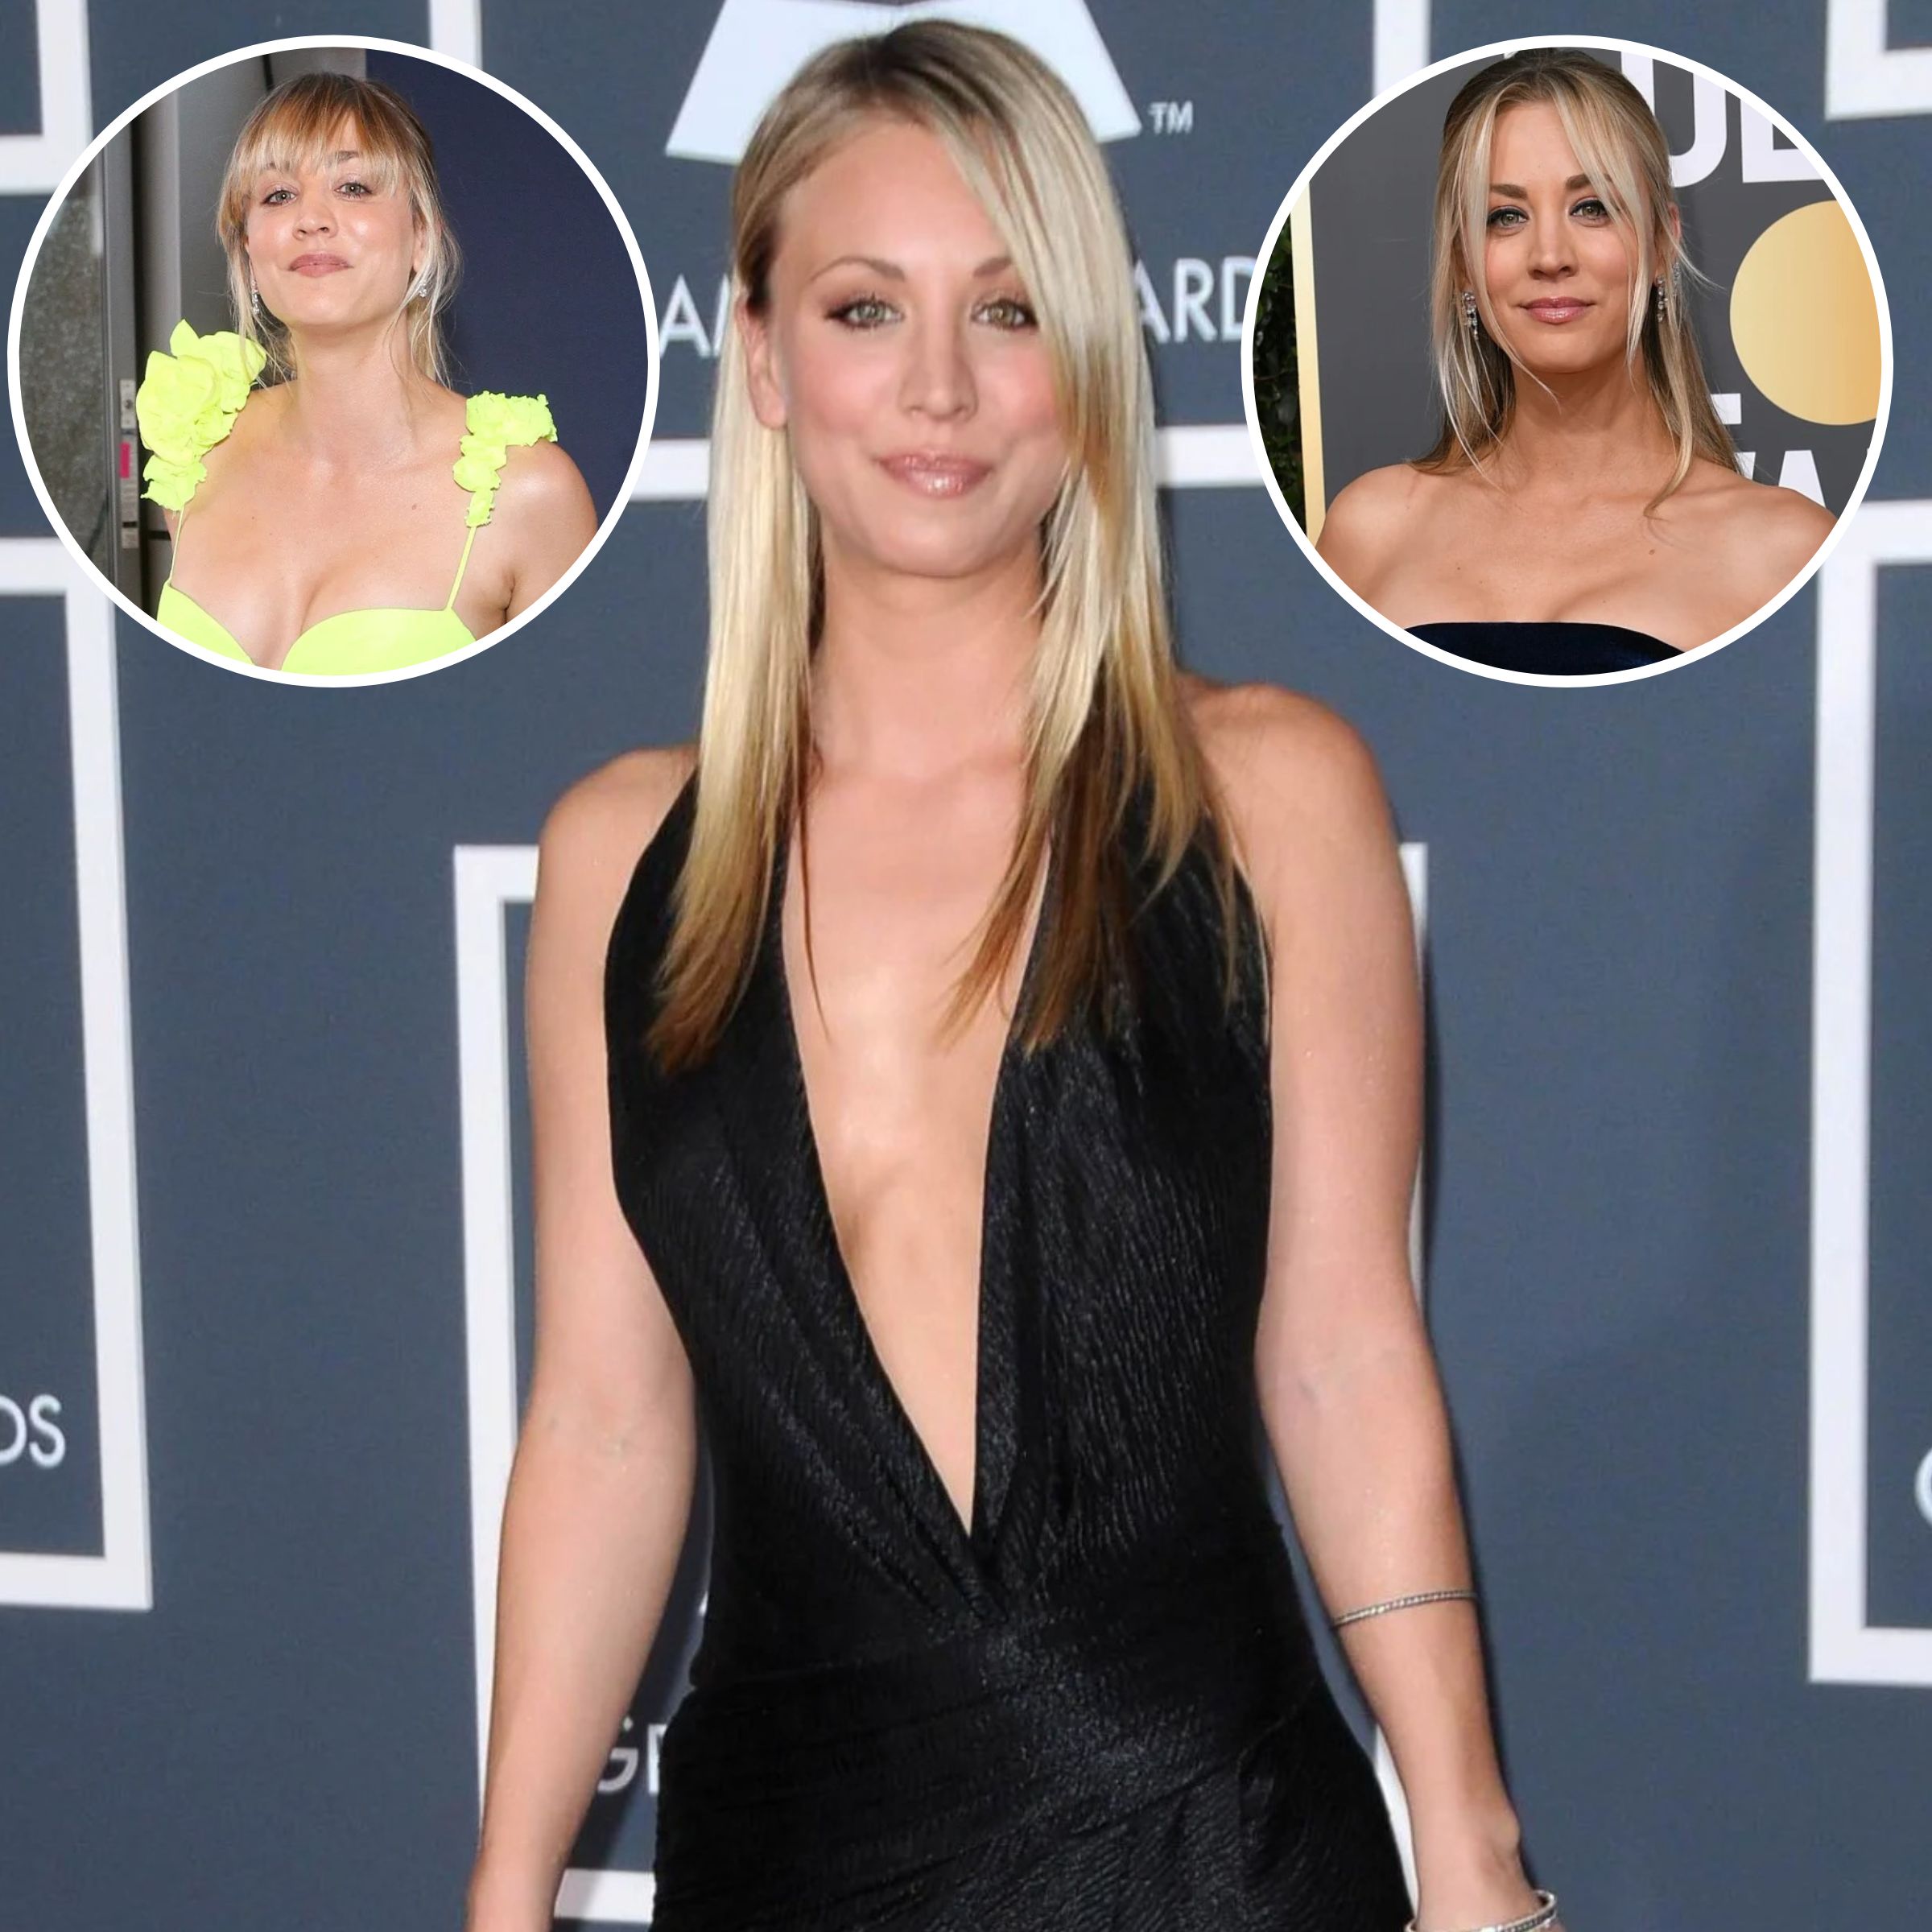 Kaley Cuoco Uncensored Porn - Kaley Cuoco Braless: Photos of the Actress Without a Bra